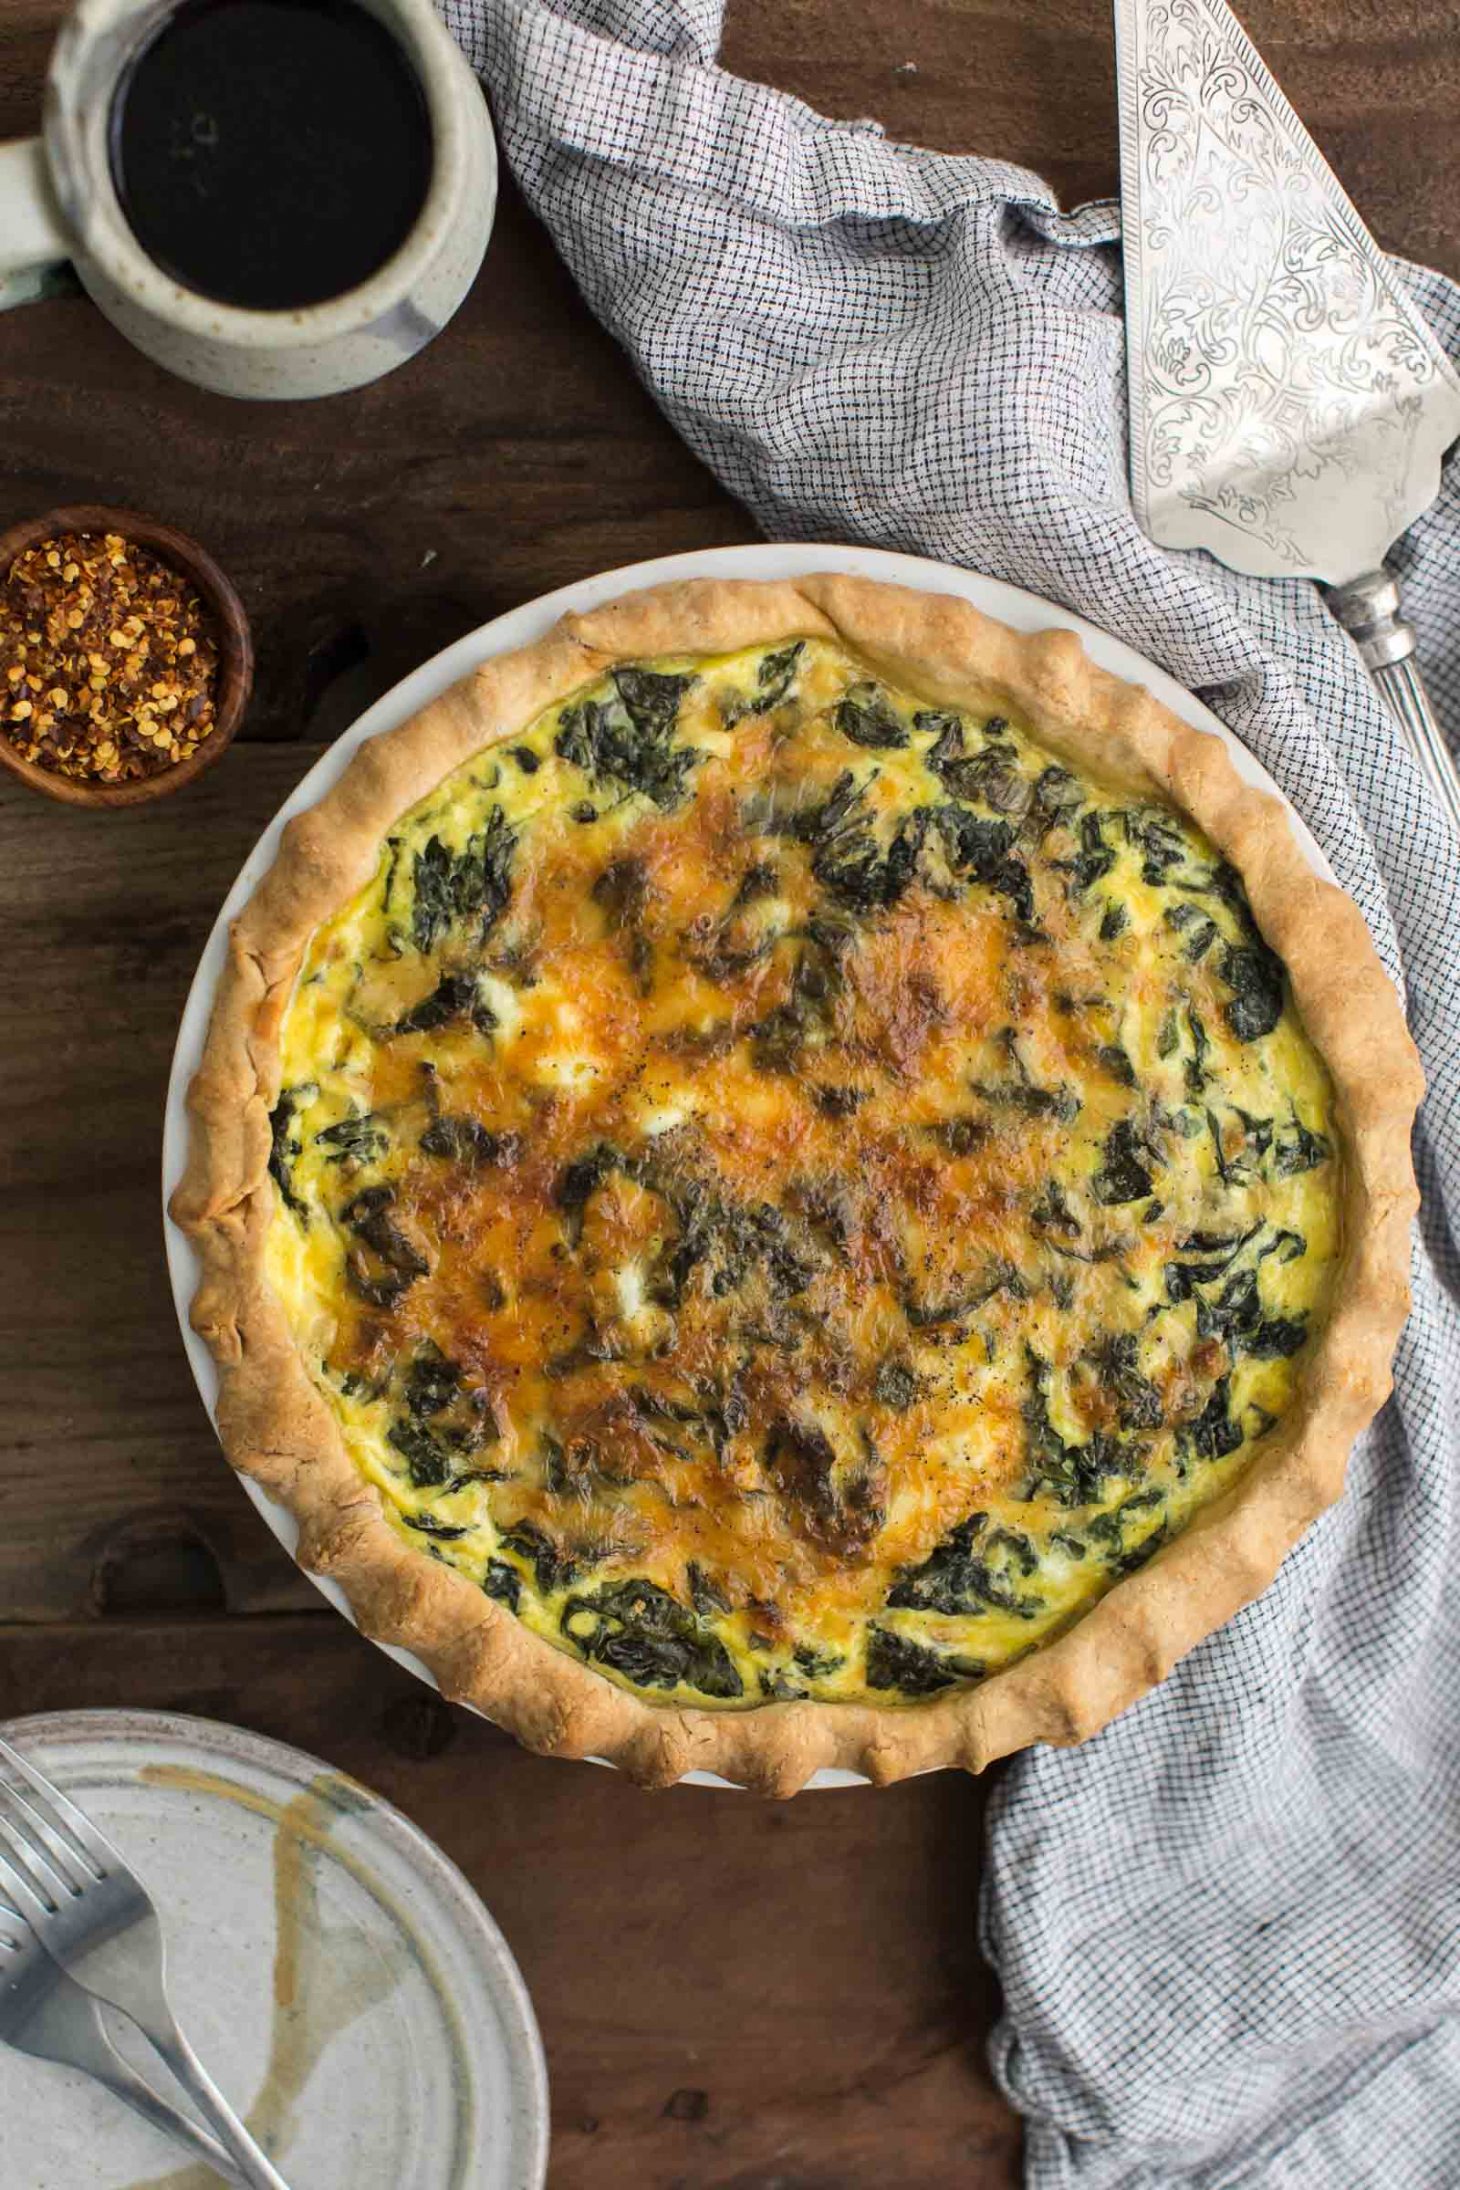 Kale Quiche with Garlic and Homemade Crust | @naturallyella